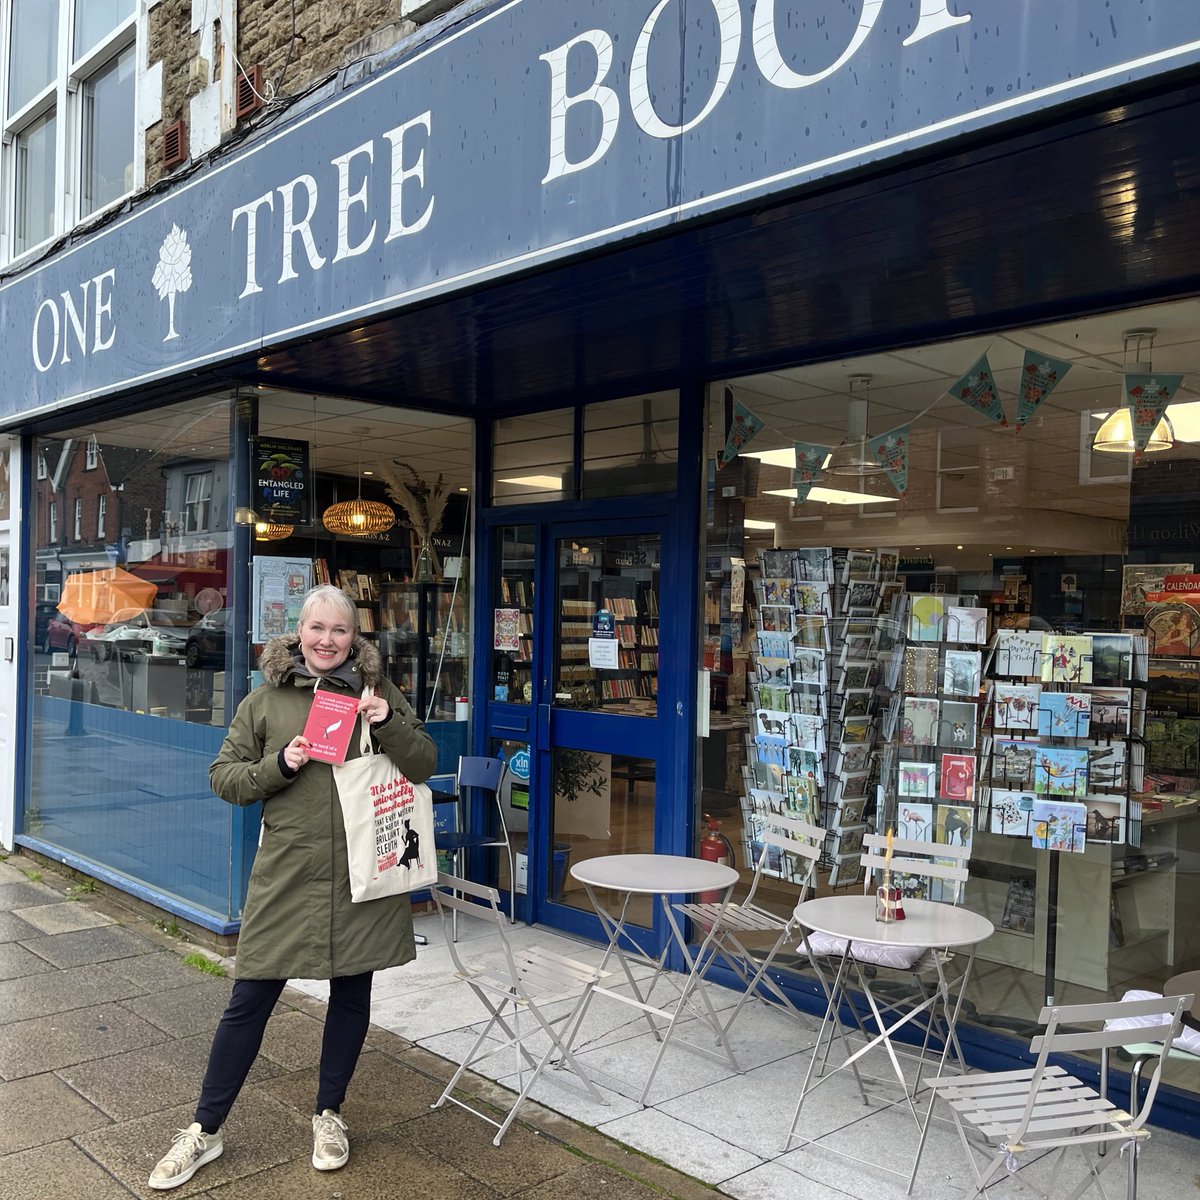 Delighted to be back in Austen country, visiting the gorgeous One Tree Books in Petersfield #MissAustenInvestigates #Indiebookshops